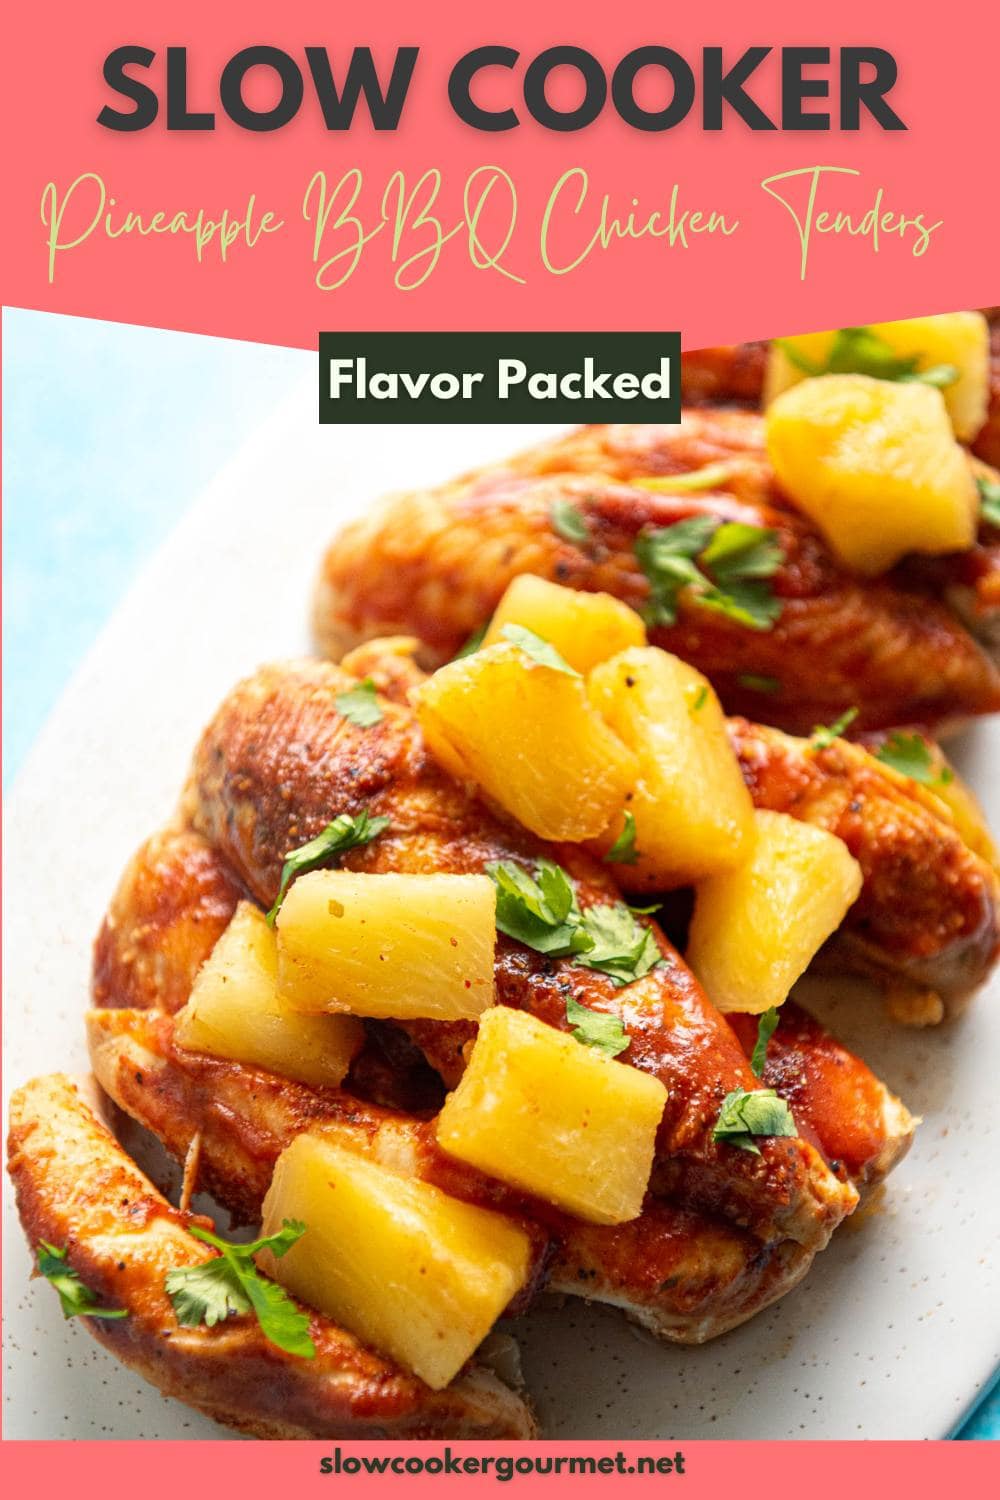 slow cooker pineapple bbq chicken tenders inside of slow cooker cooked words "flavor packed" on top